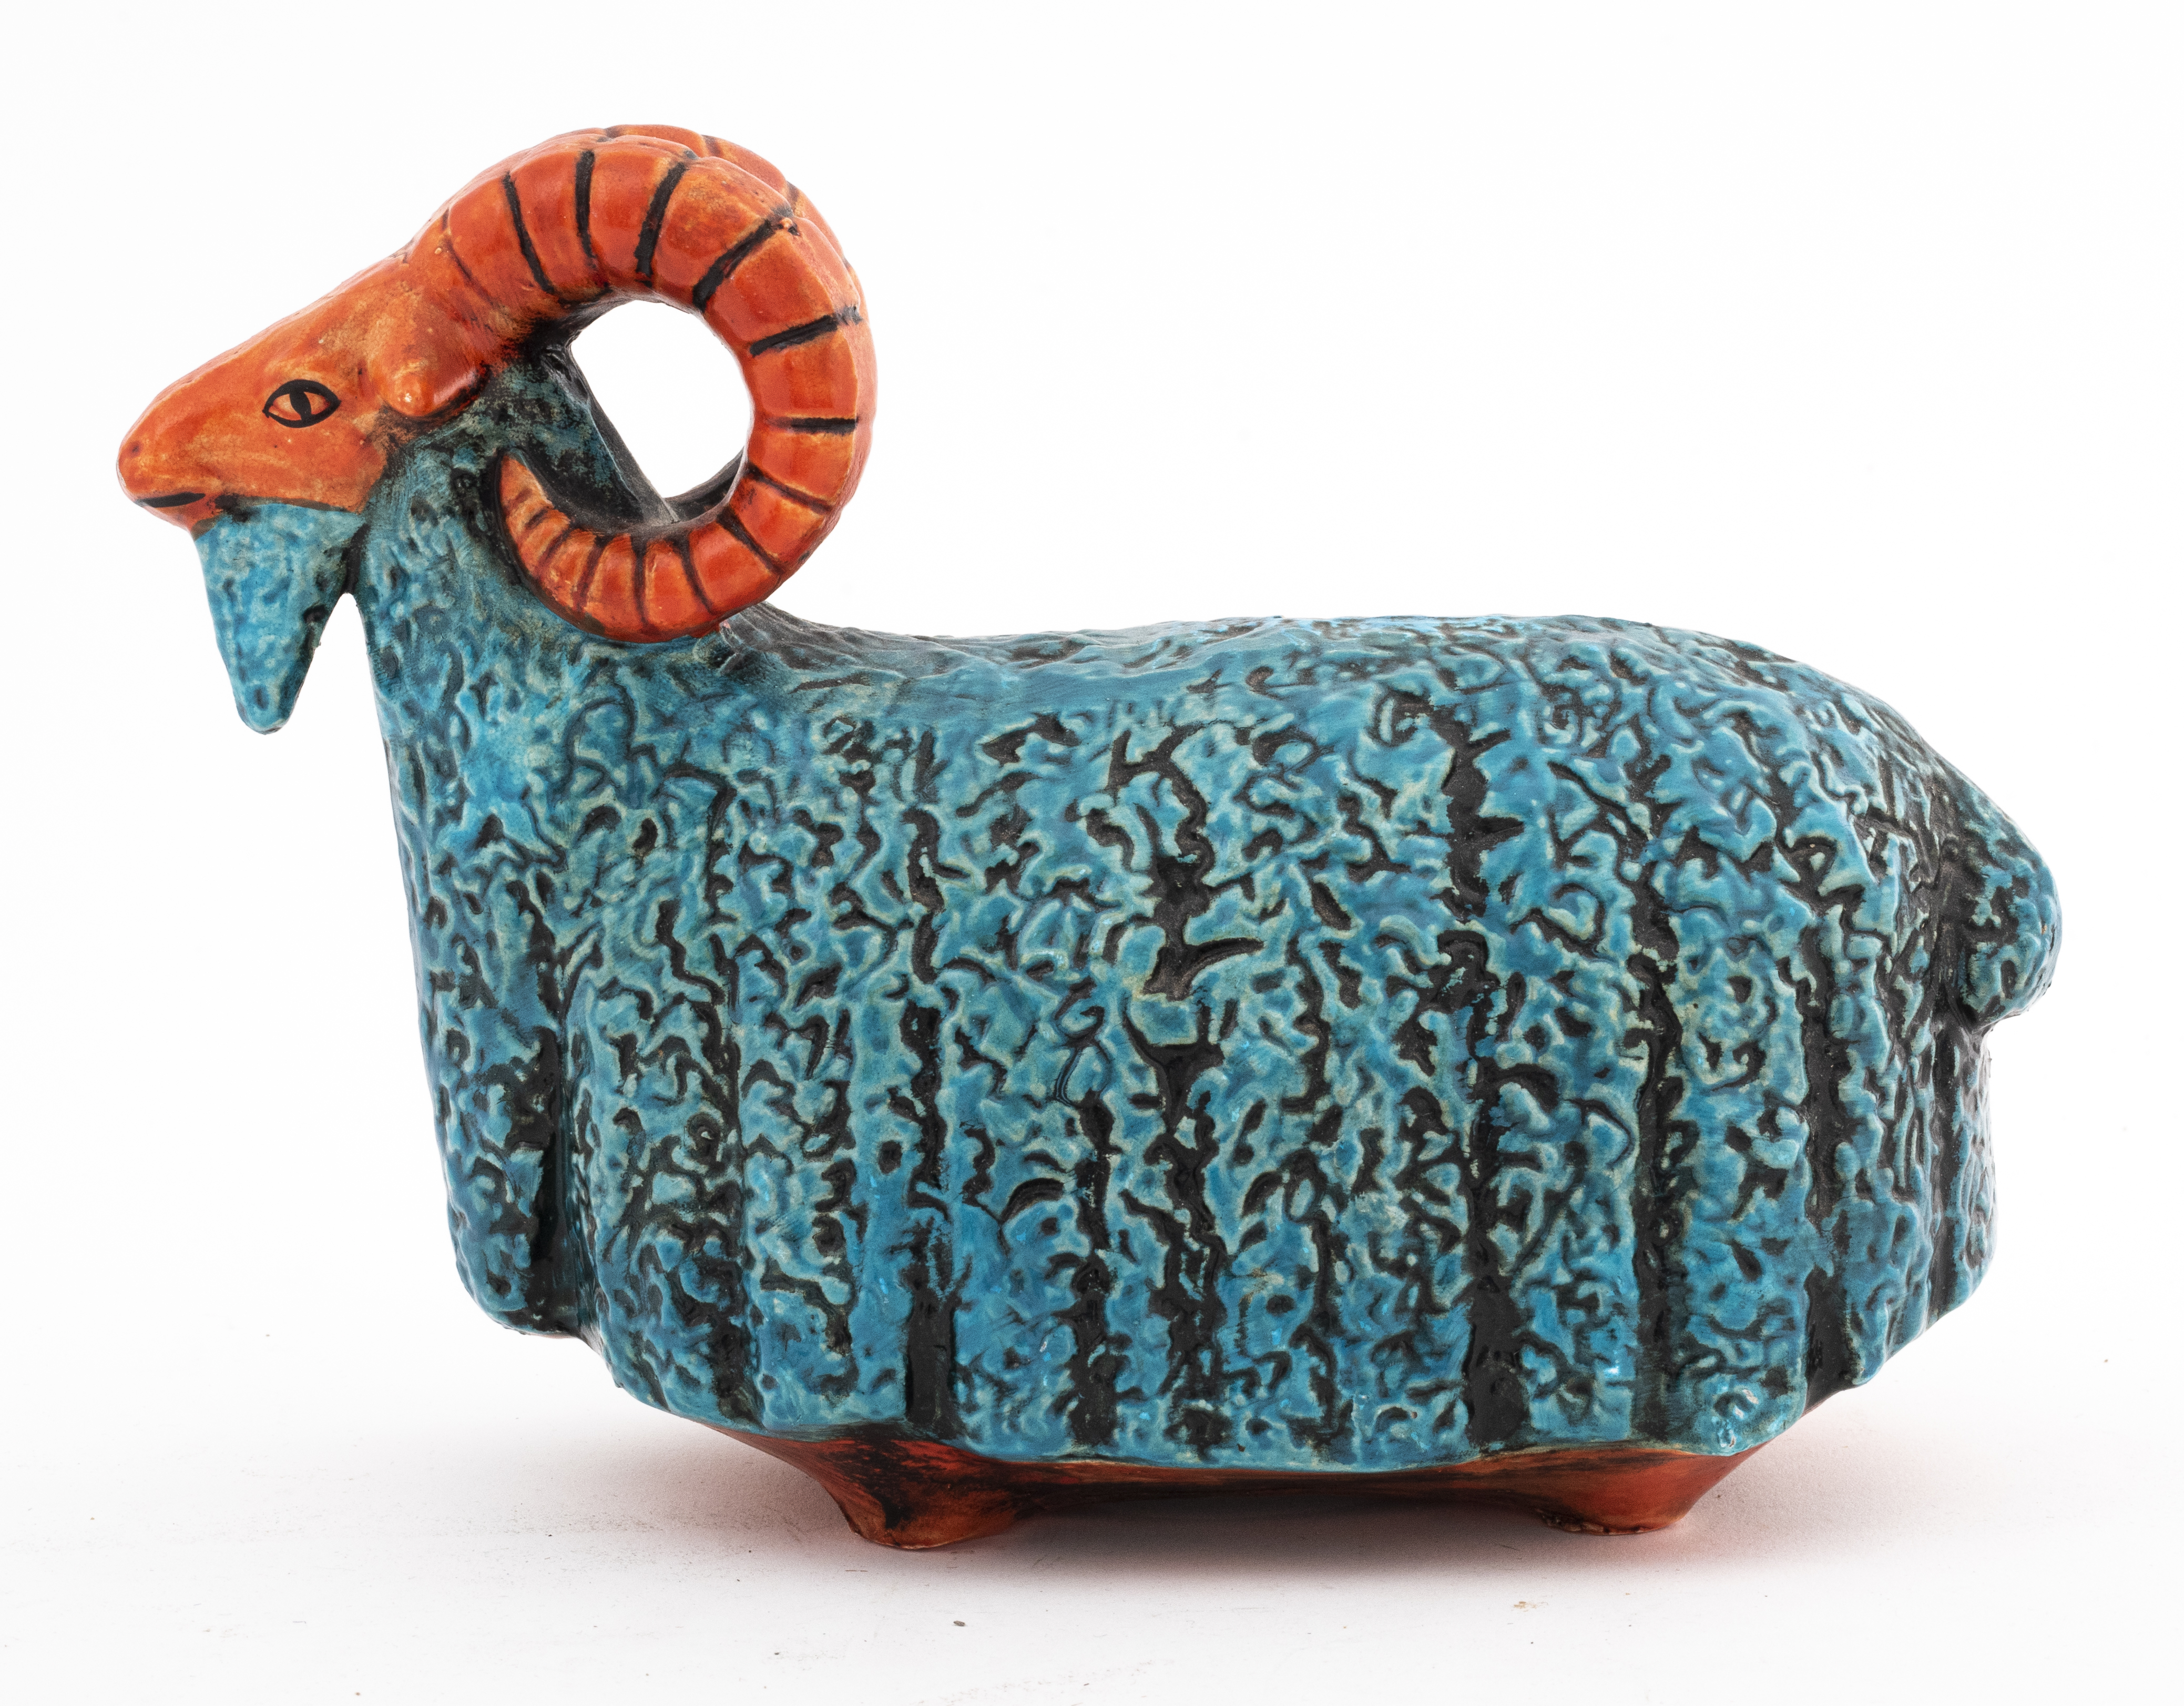 COLORFUL RAM COIN BANK Colorful